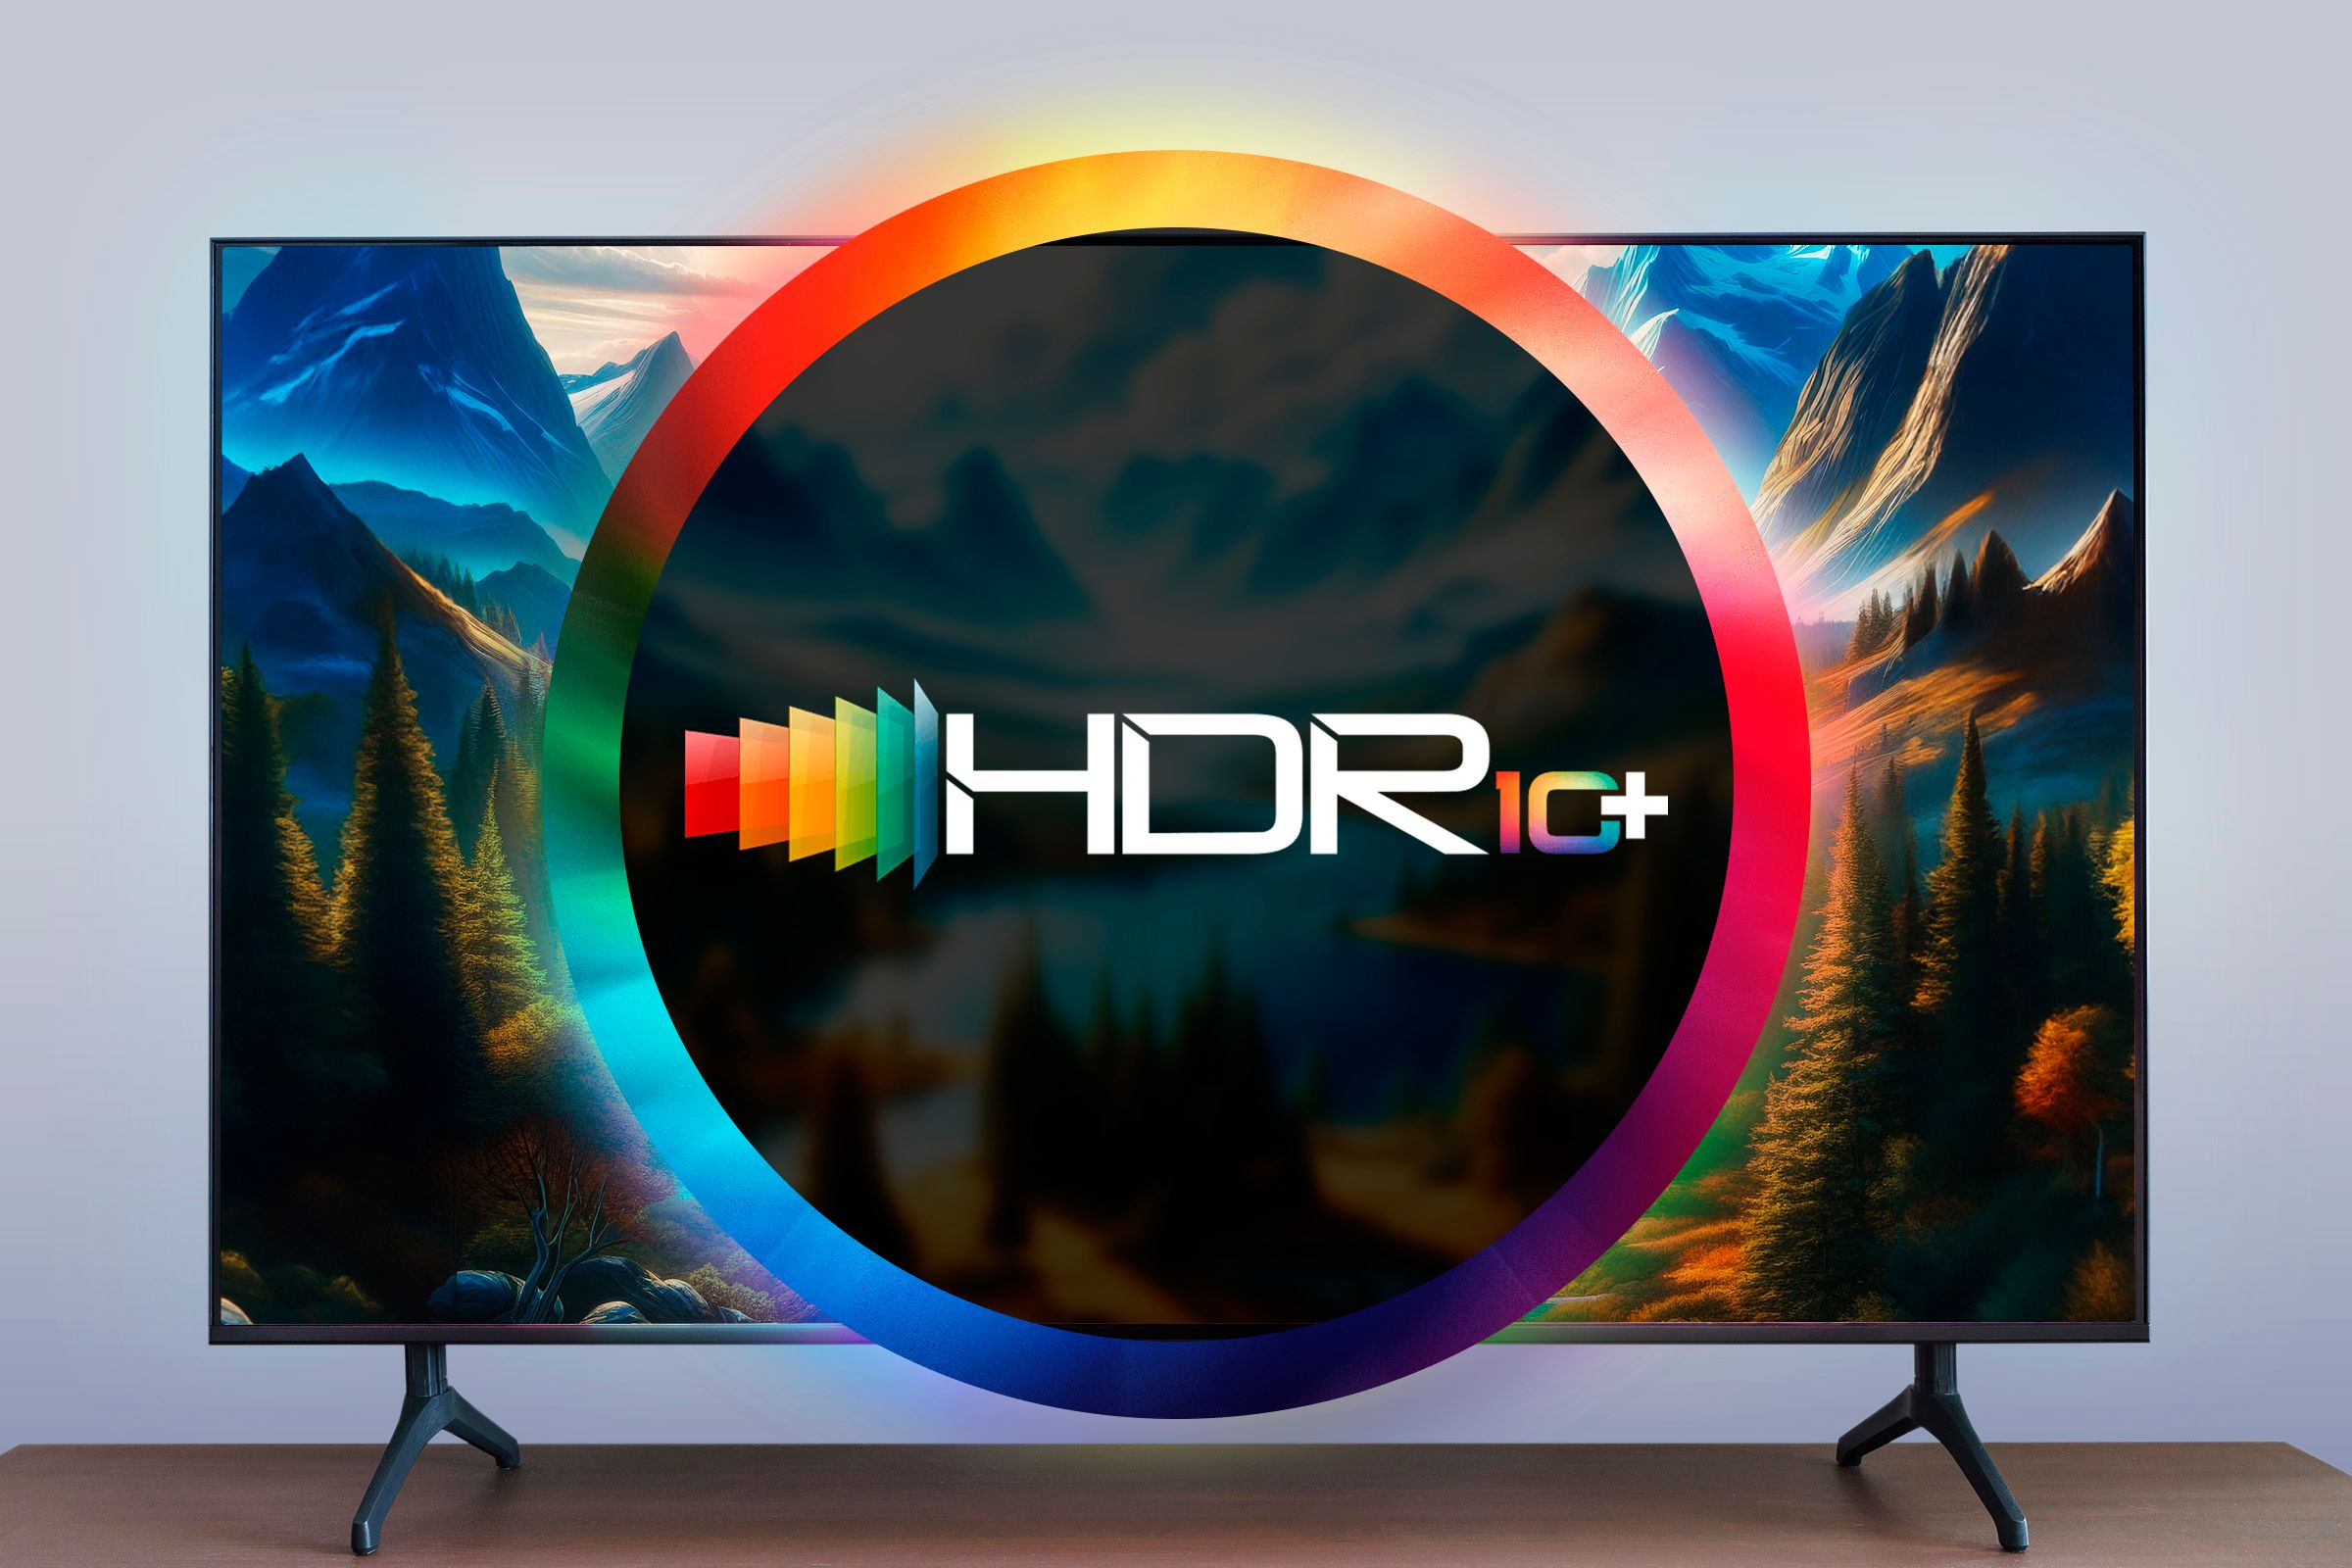 A TV and a color wheel in the center with the HDR10+ symbol.